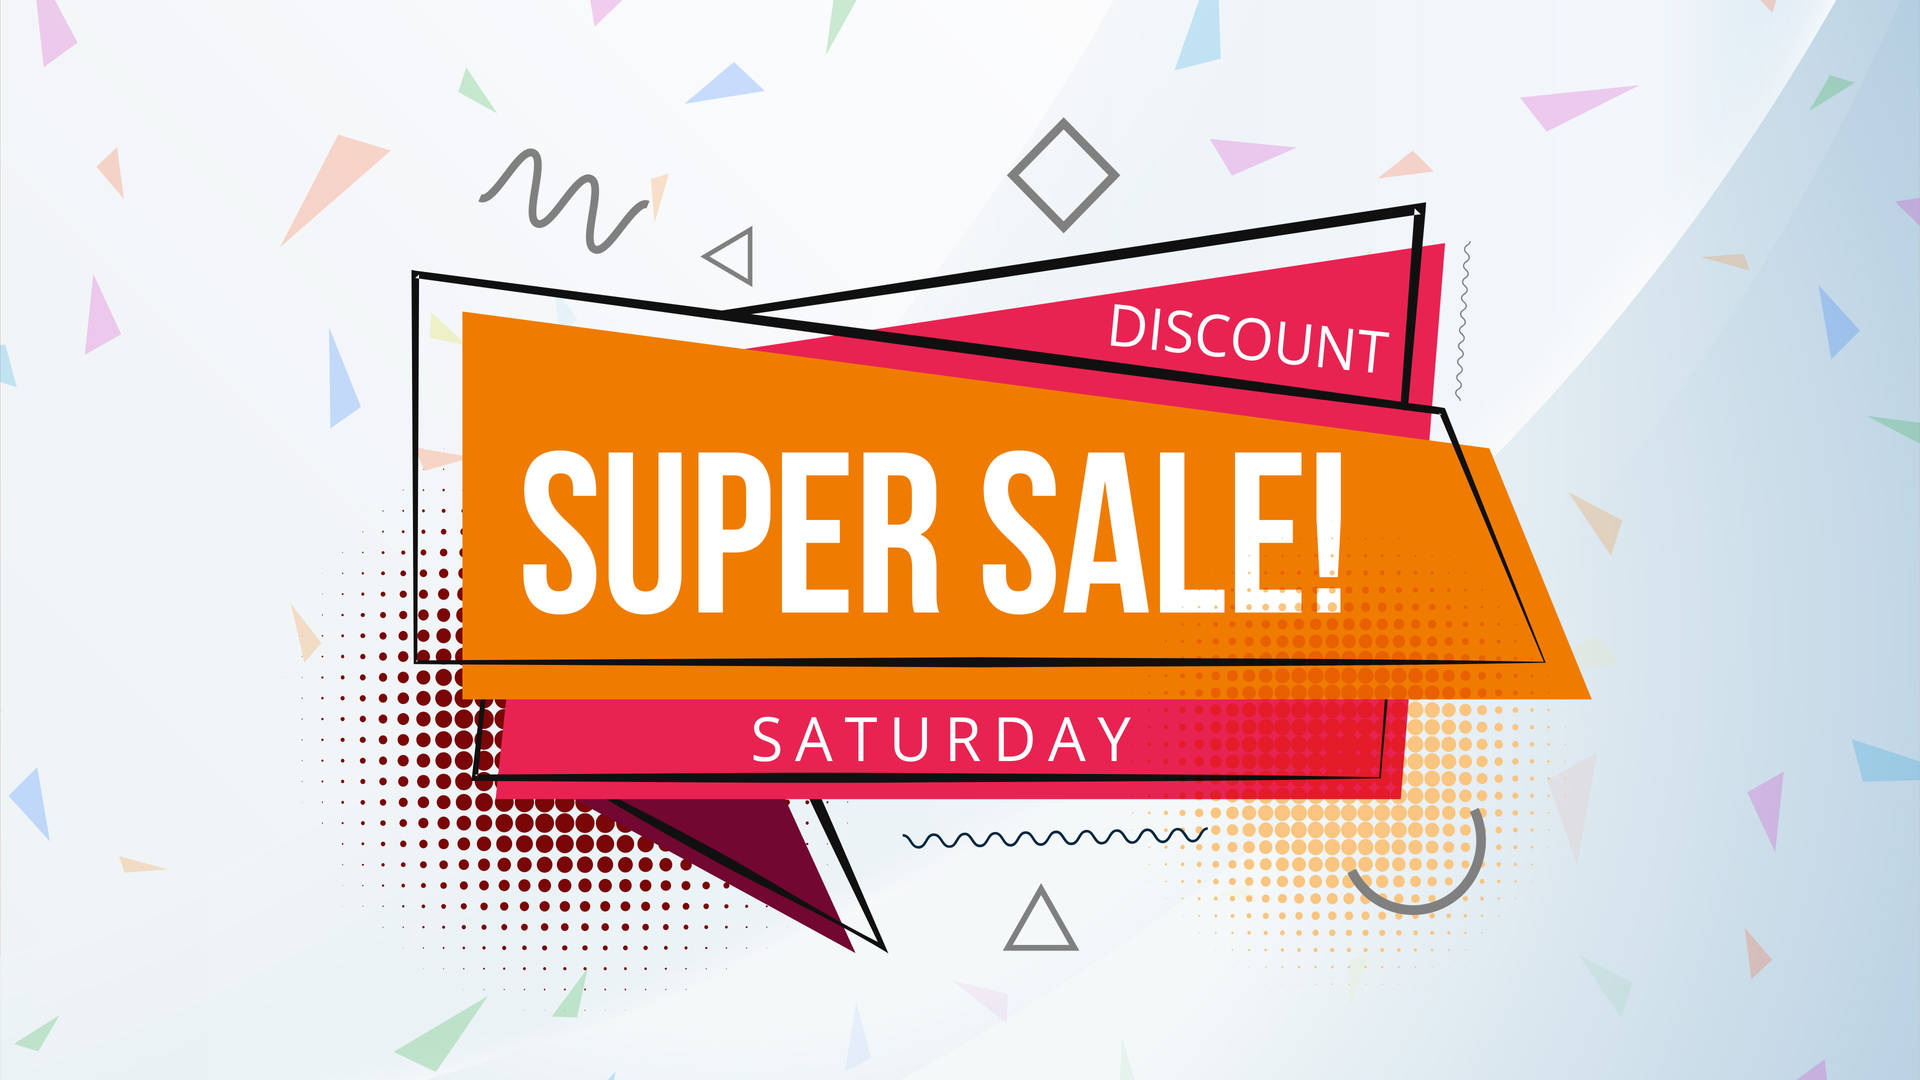 Super Saturday Sales Fever On Festive Items